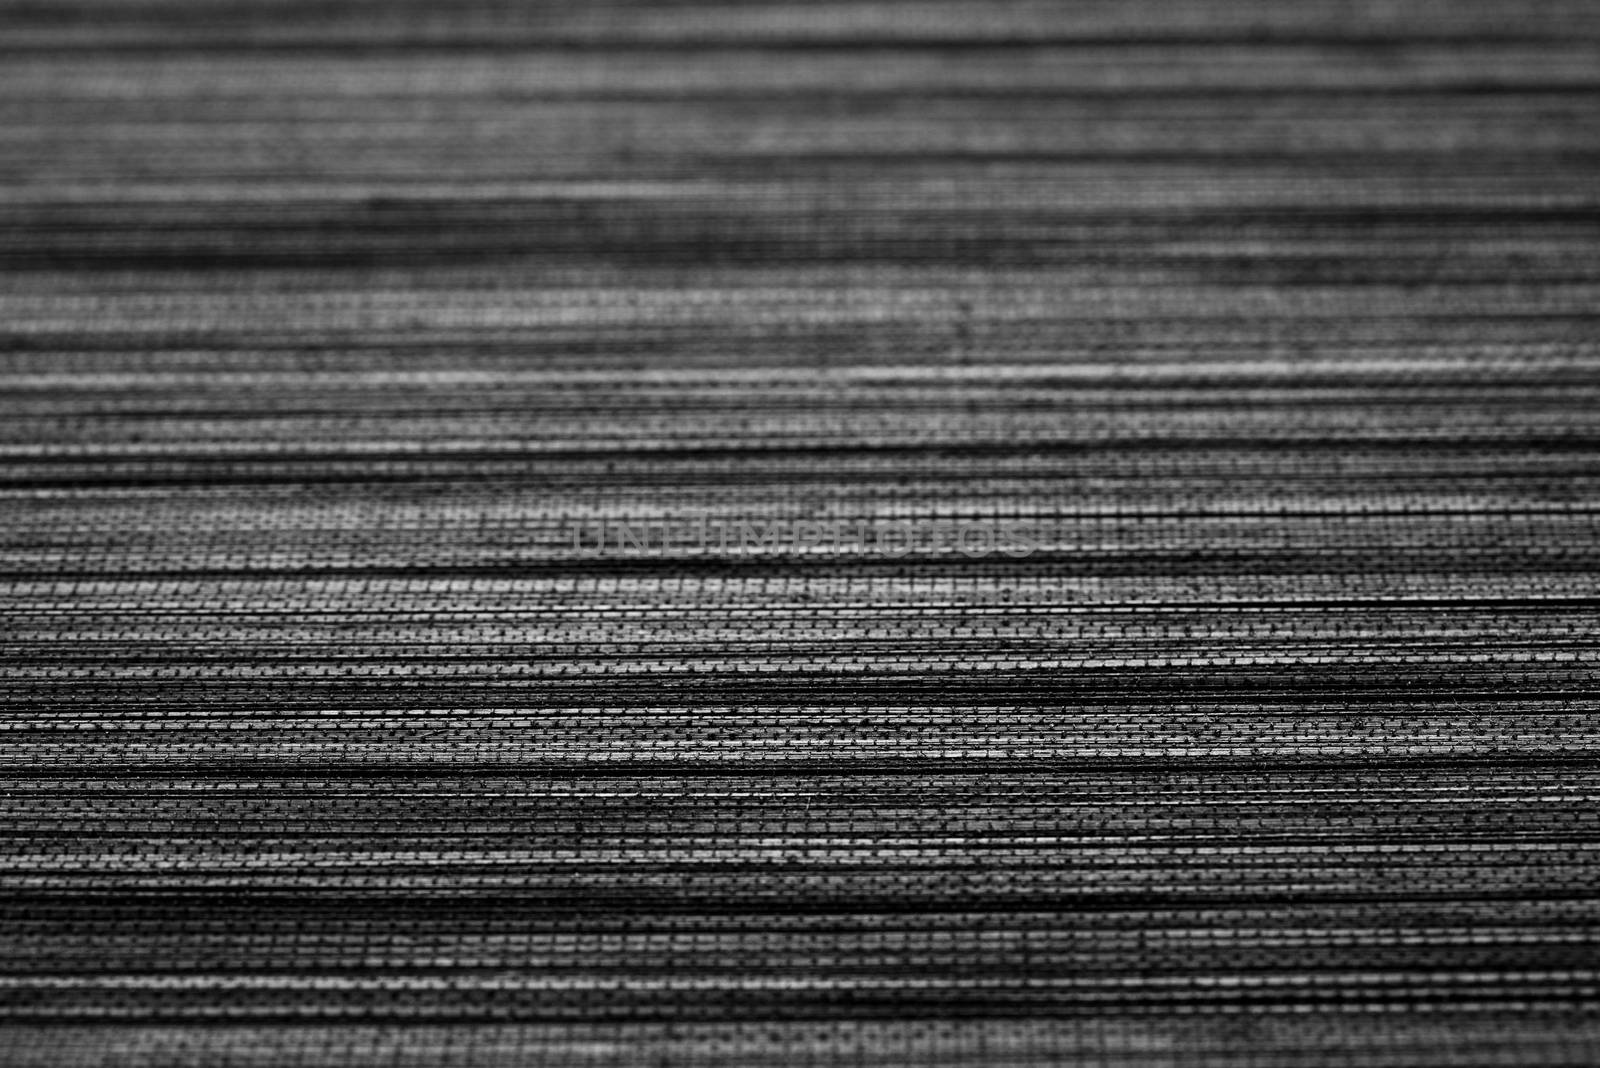 abstract texture of black bamboo mat for graphic design.